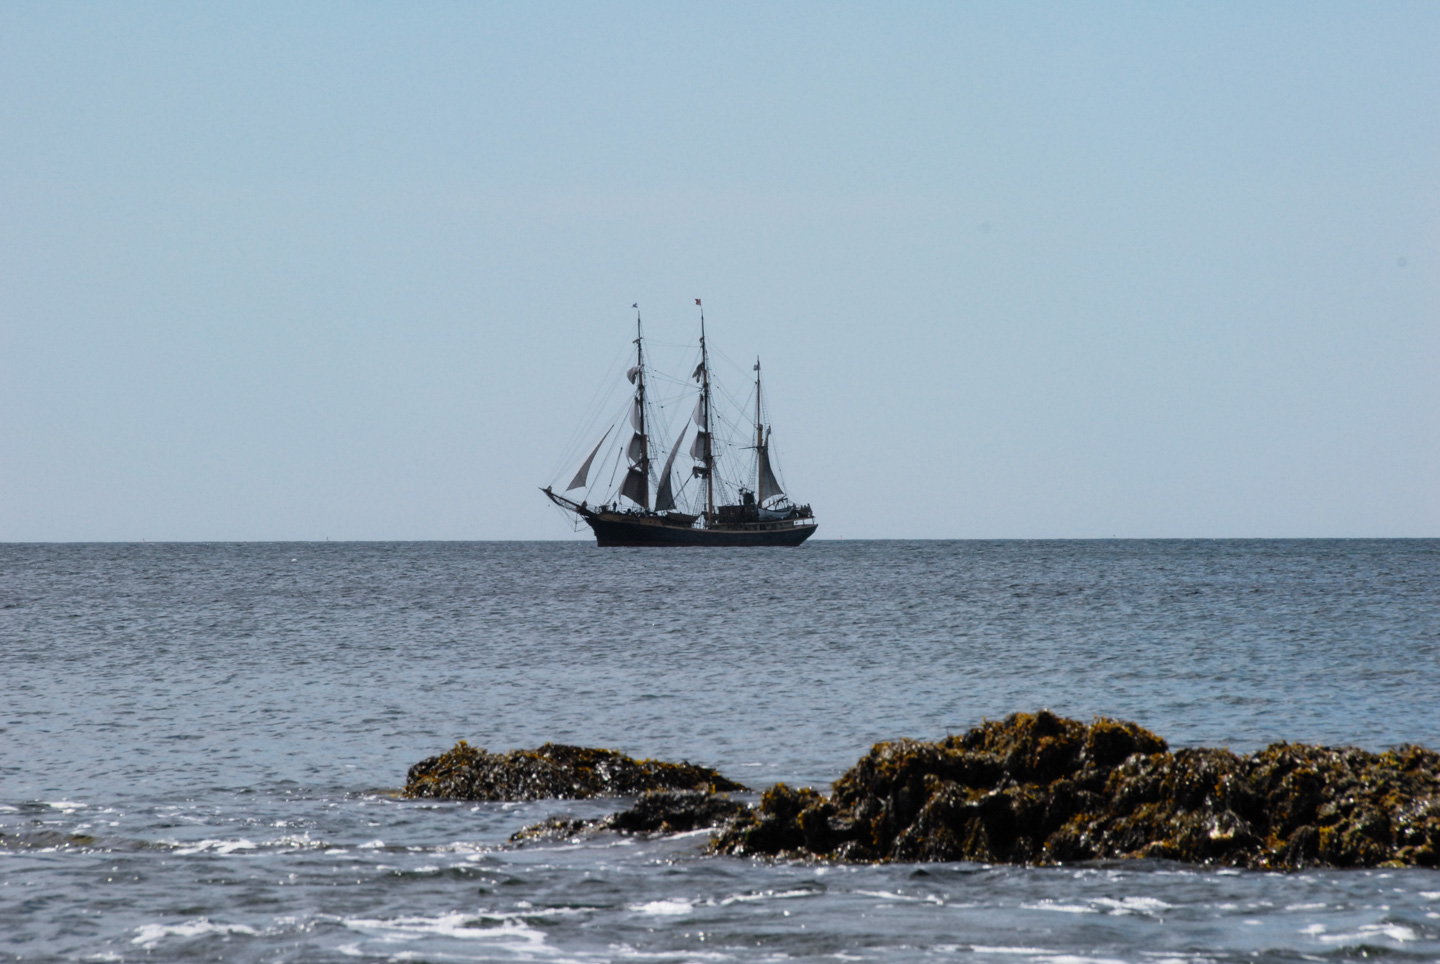 Tall ship with sails furled